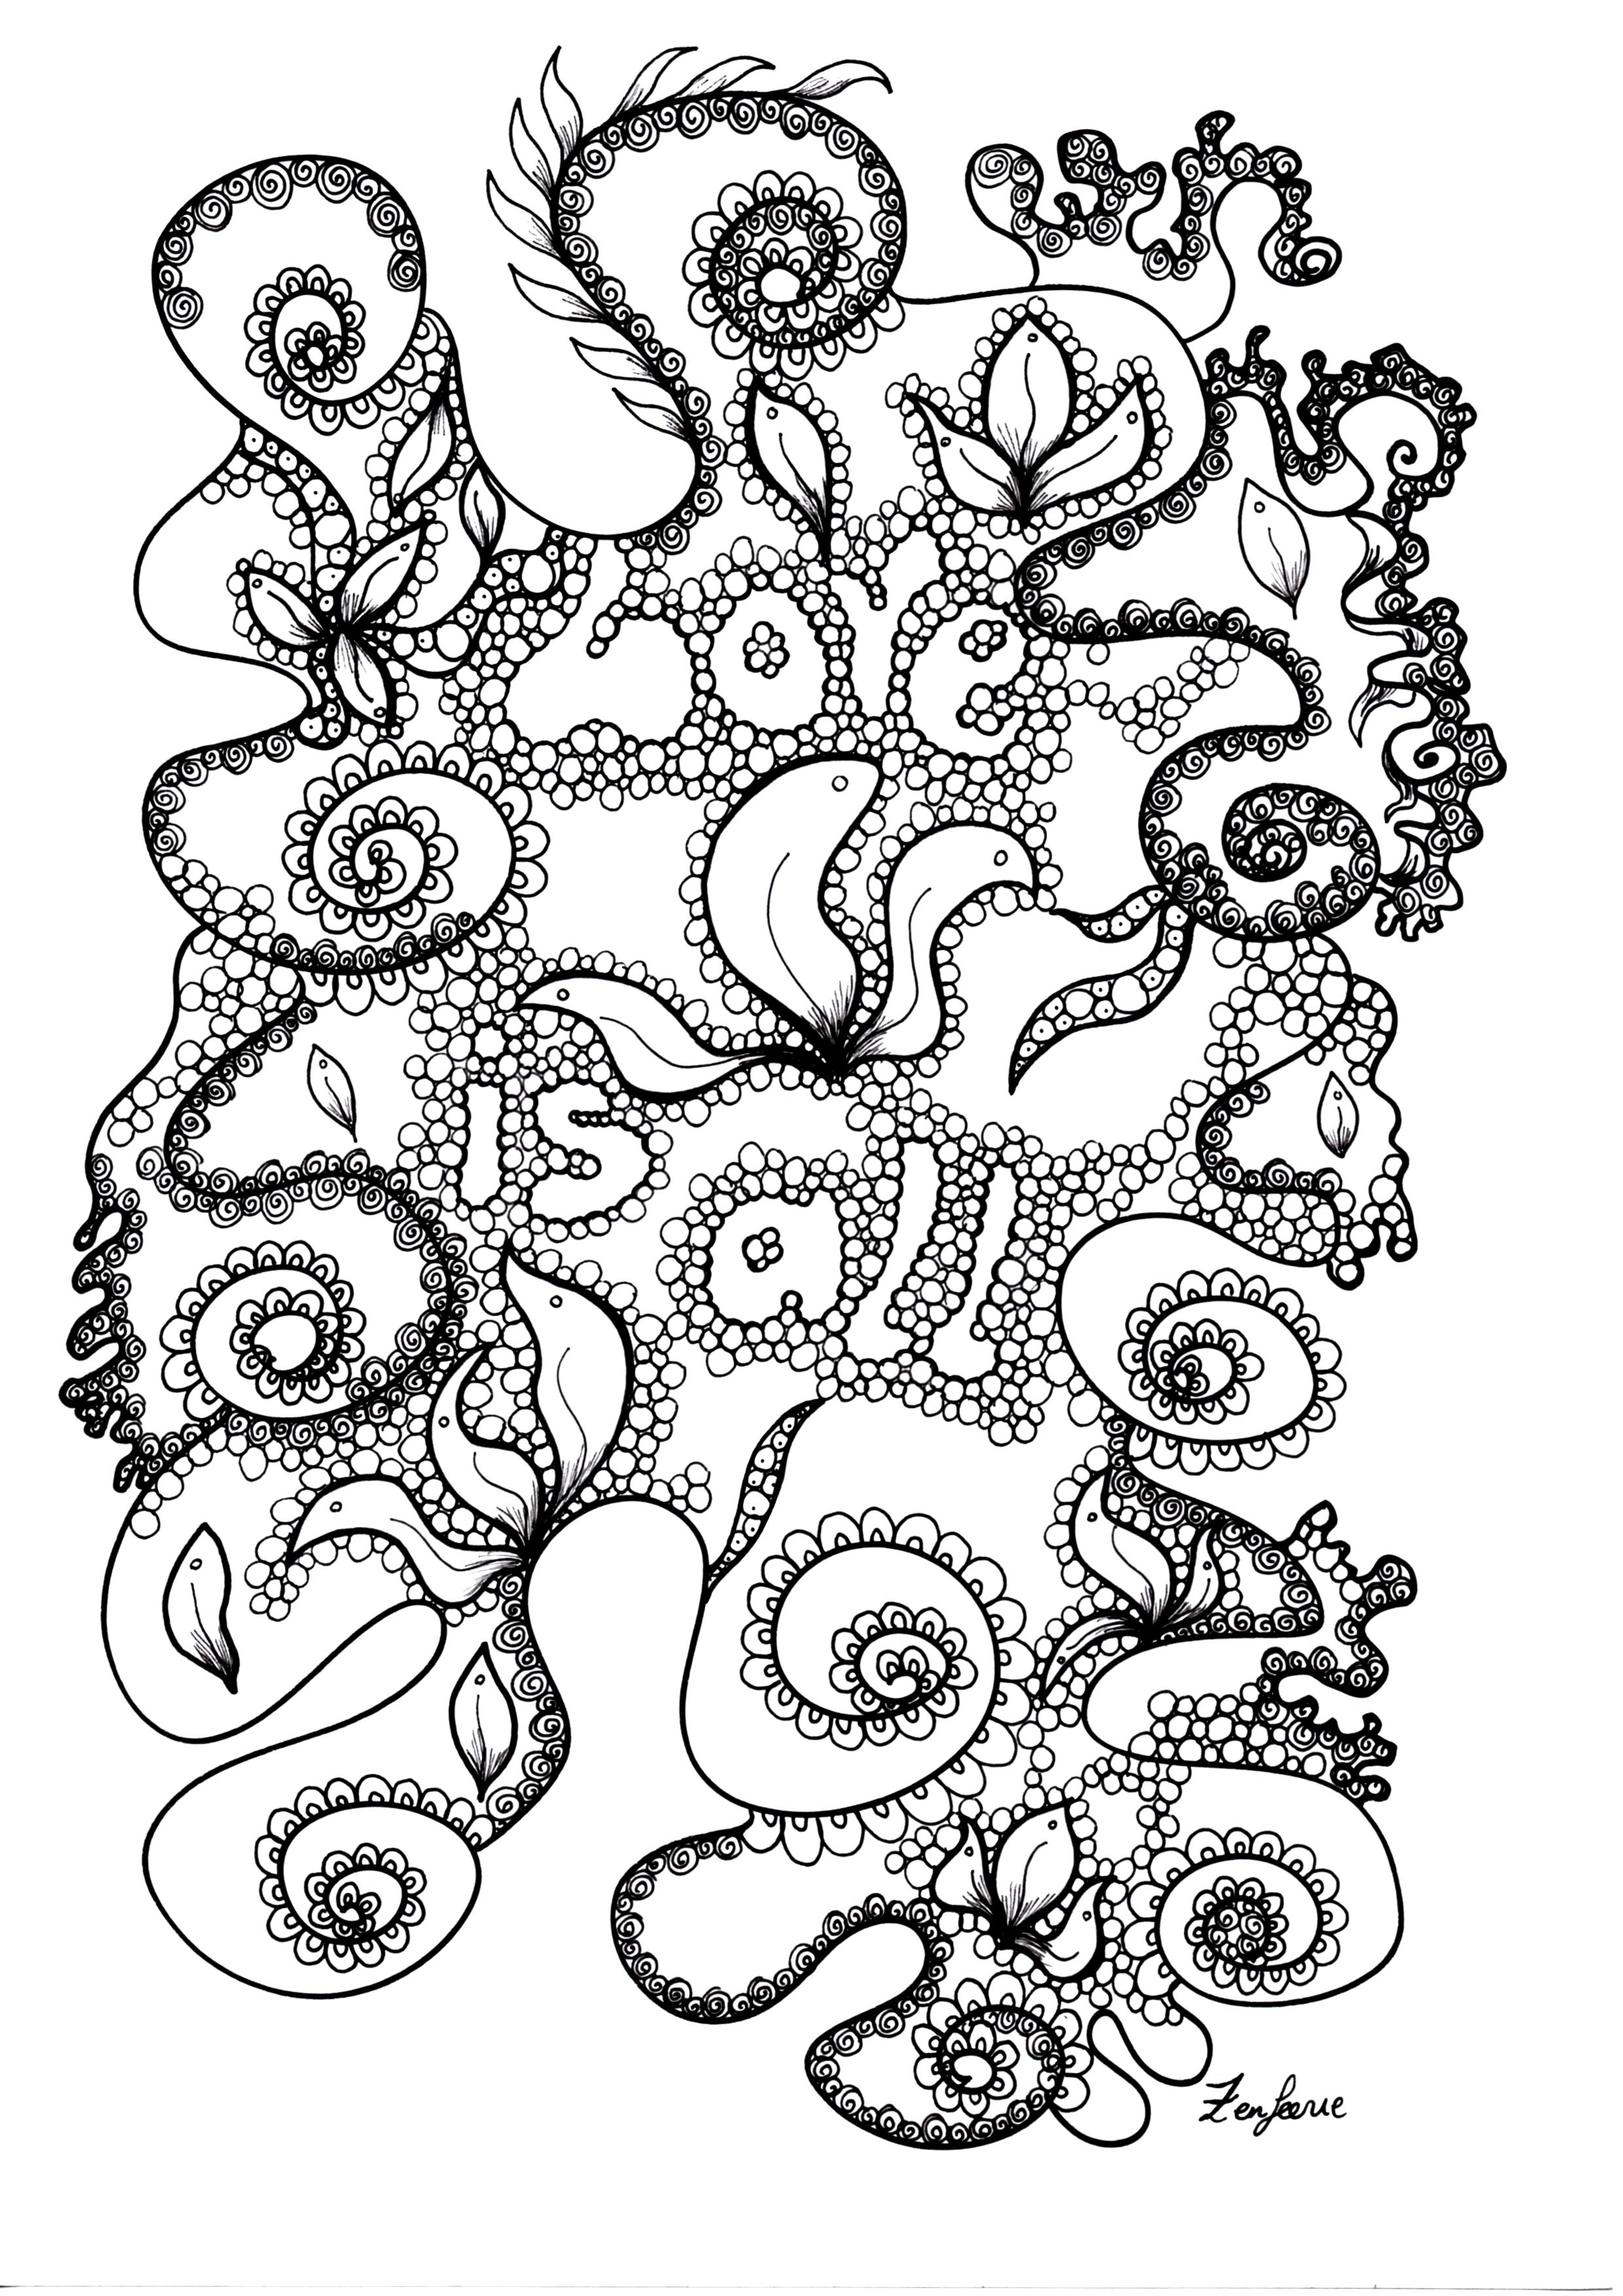 'Love is all' : a Zentangle coloring page